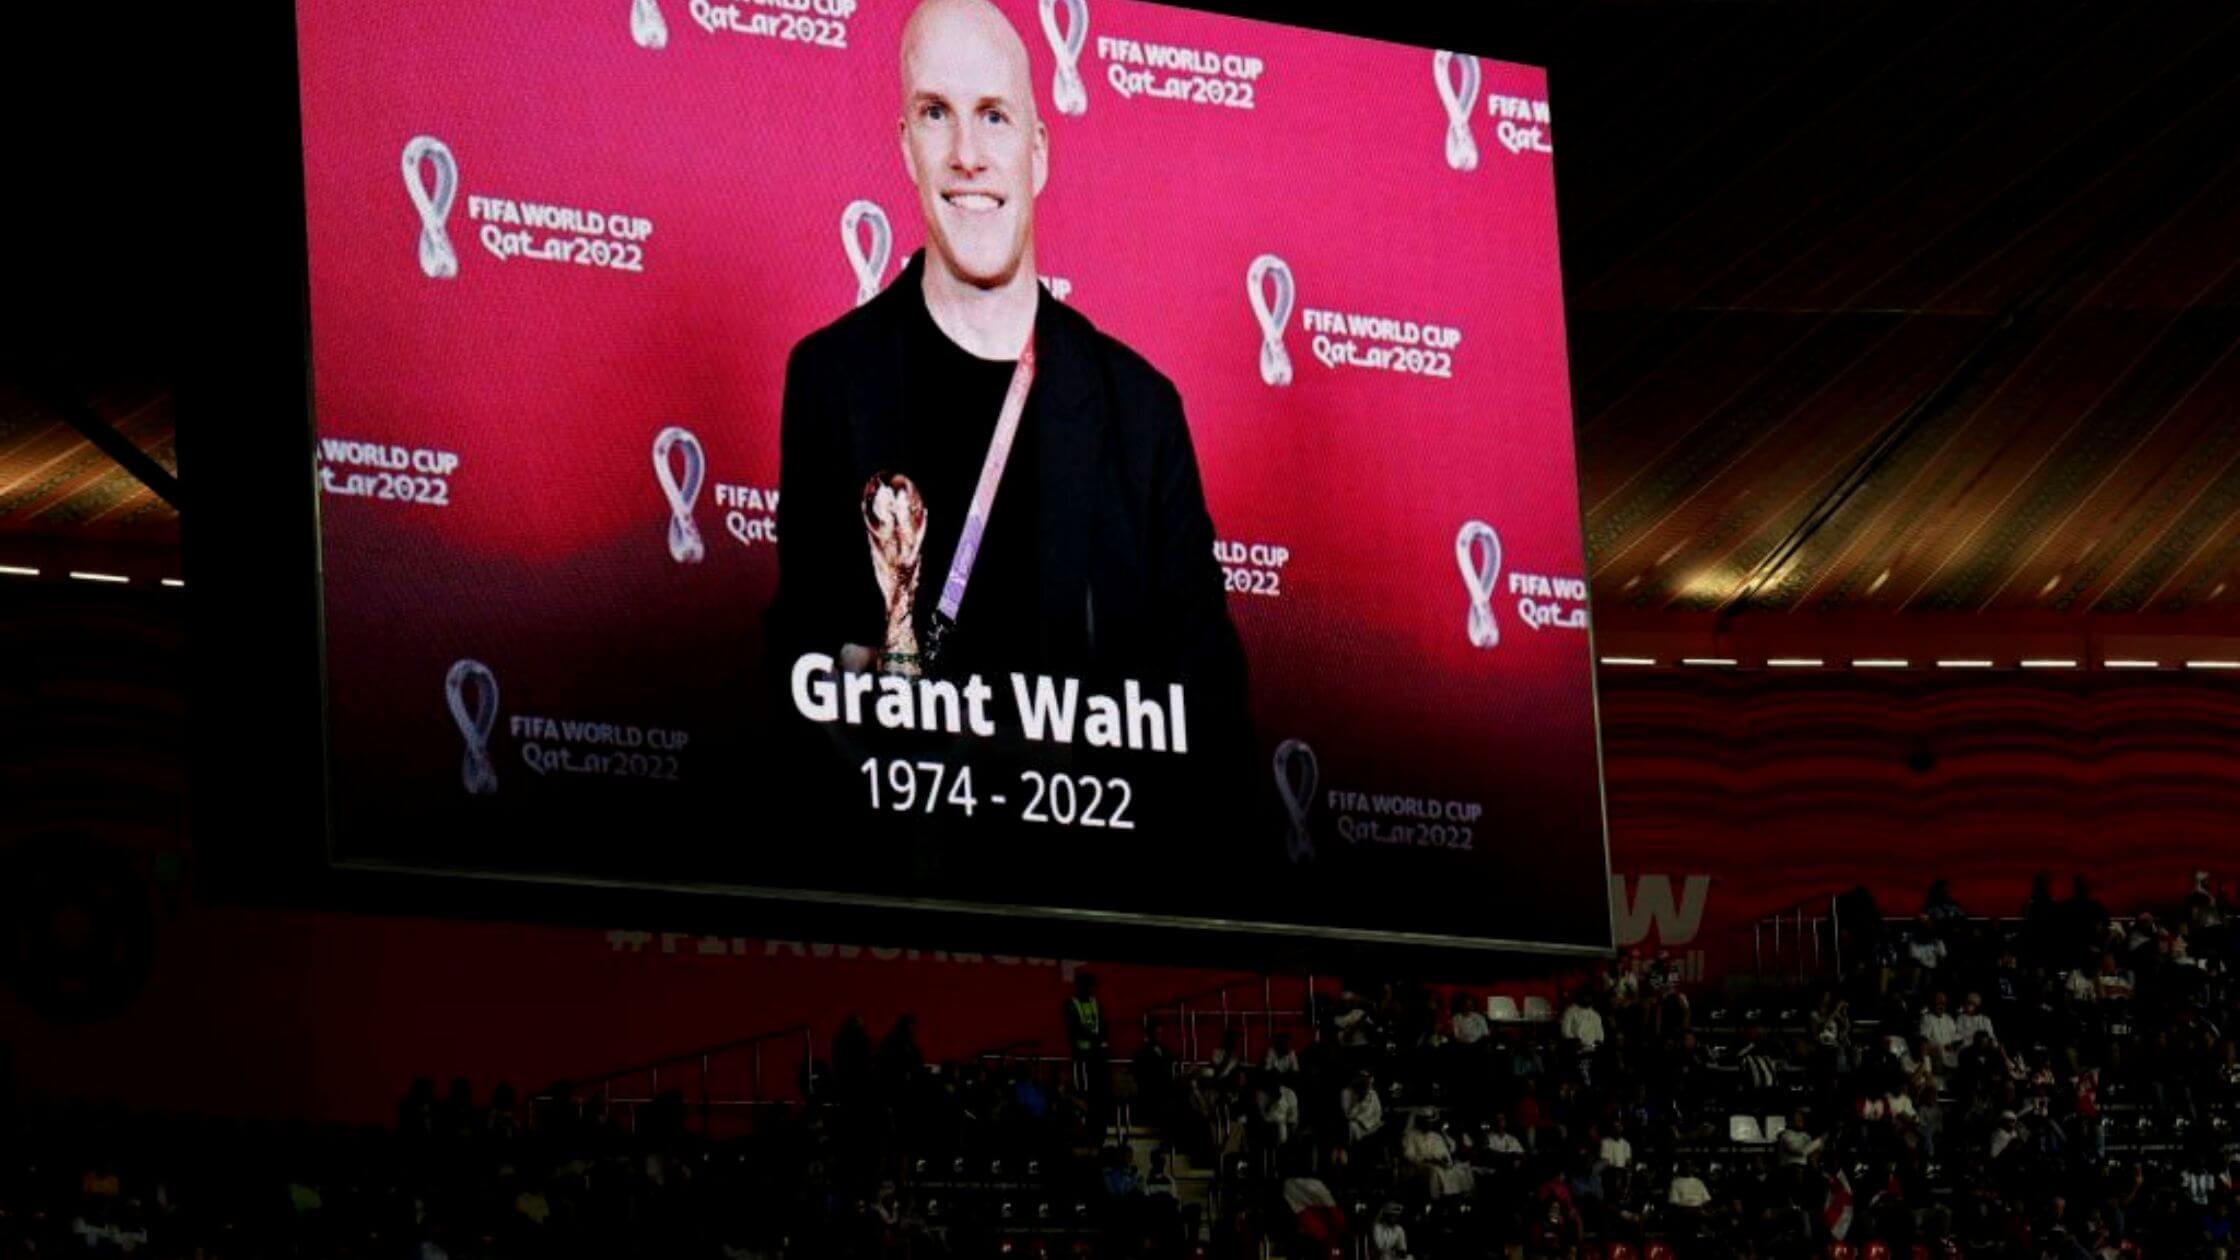 U.S. Soccer Journalist Grant Wahl Passed Away In Qatar While World Cup Coverage